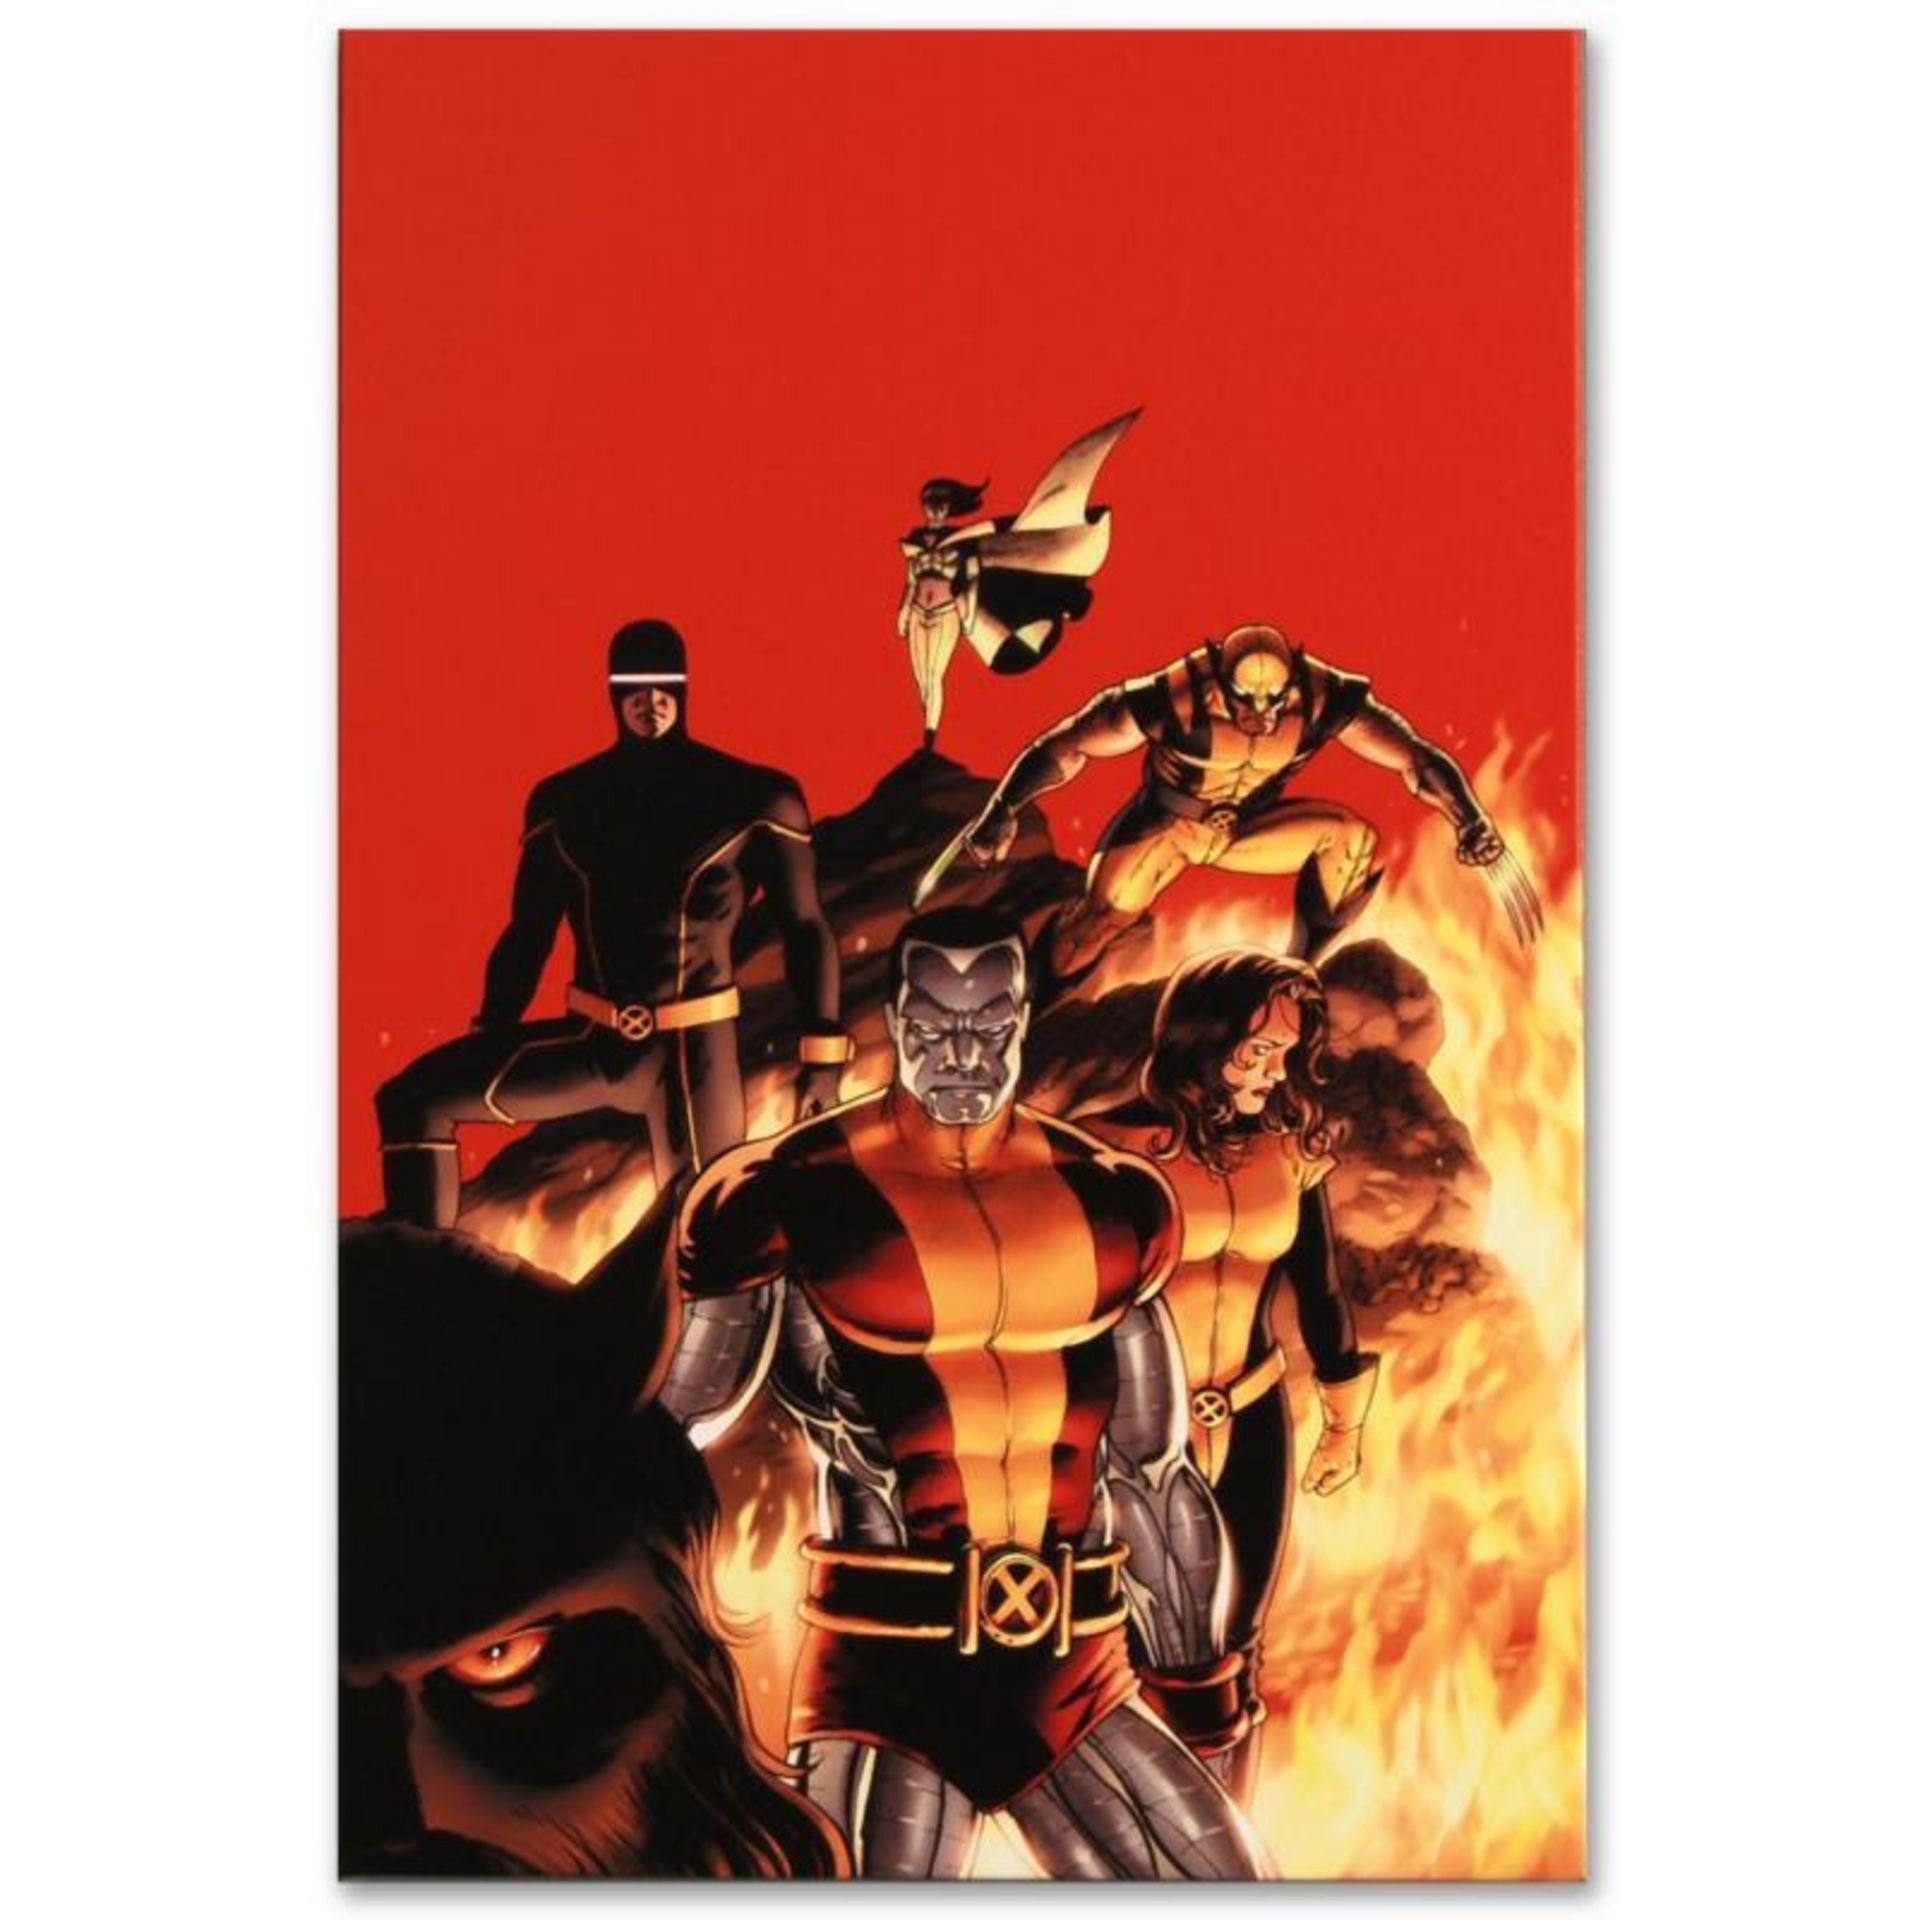 Marvel Comics "Astonishing X-Men #13" Numbered Limited Edition Giclee on Canvas